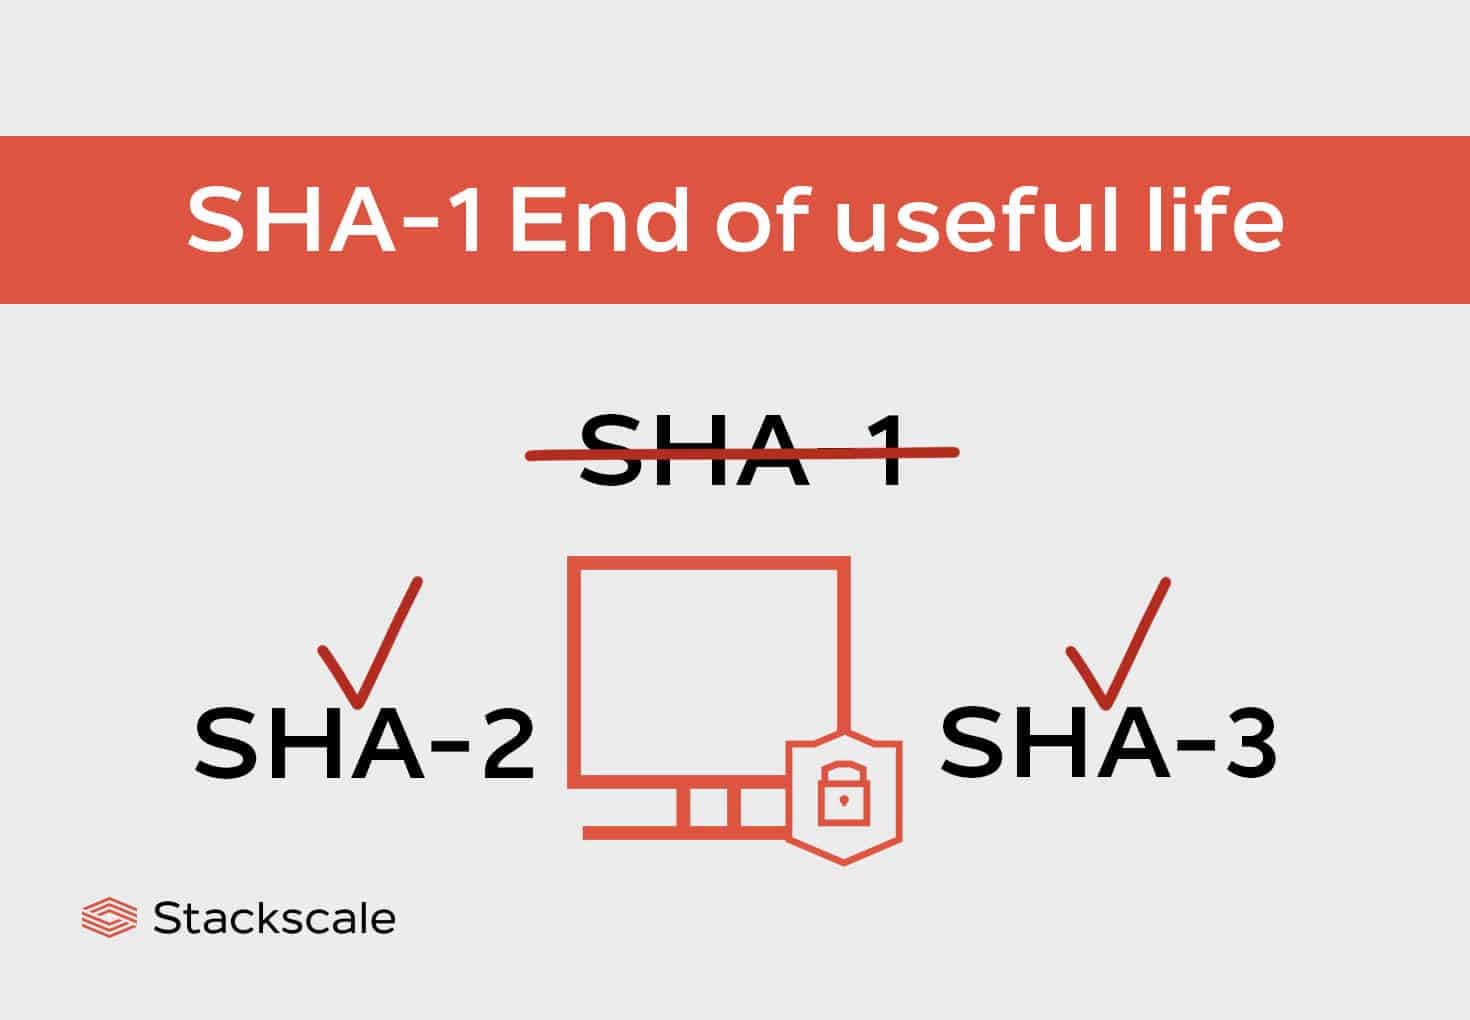 SHA-1 cryptographic algorithm’s end of useful life